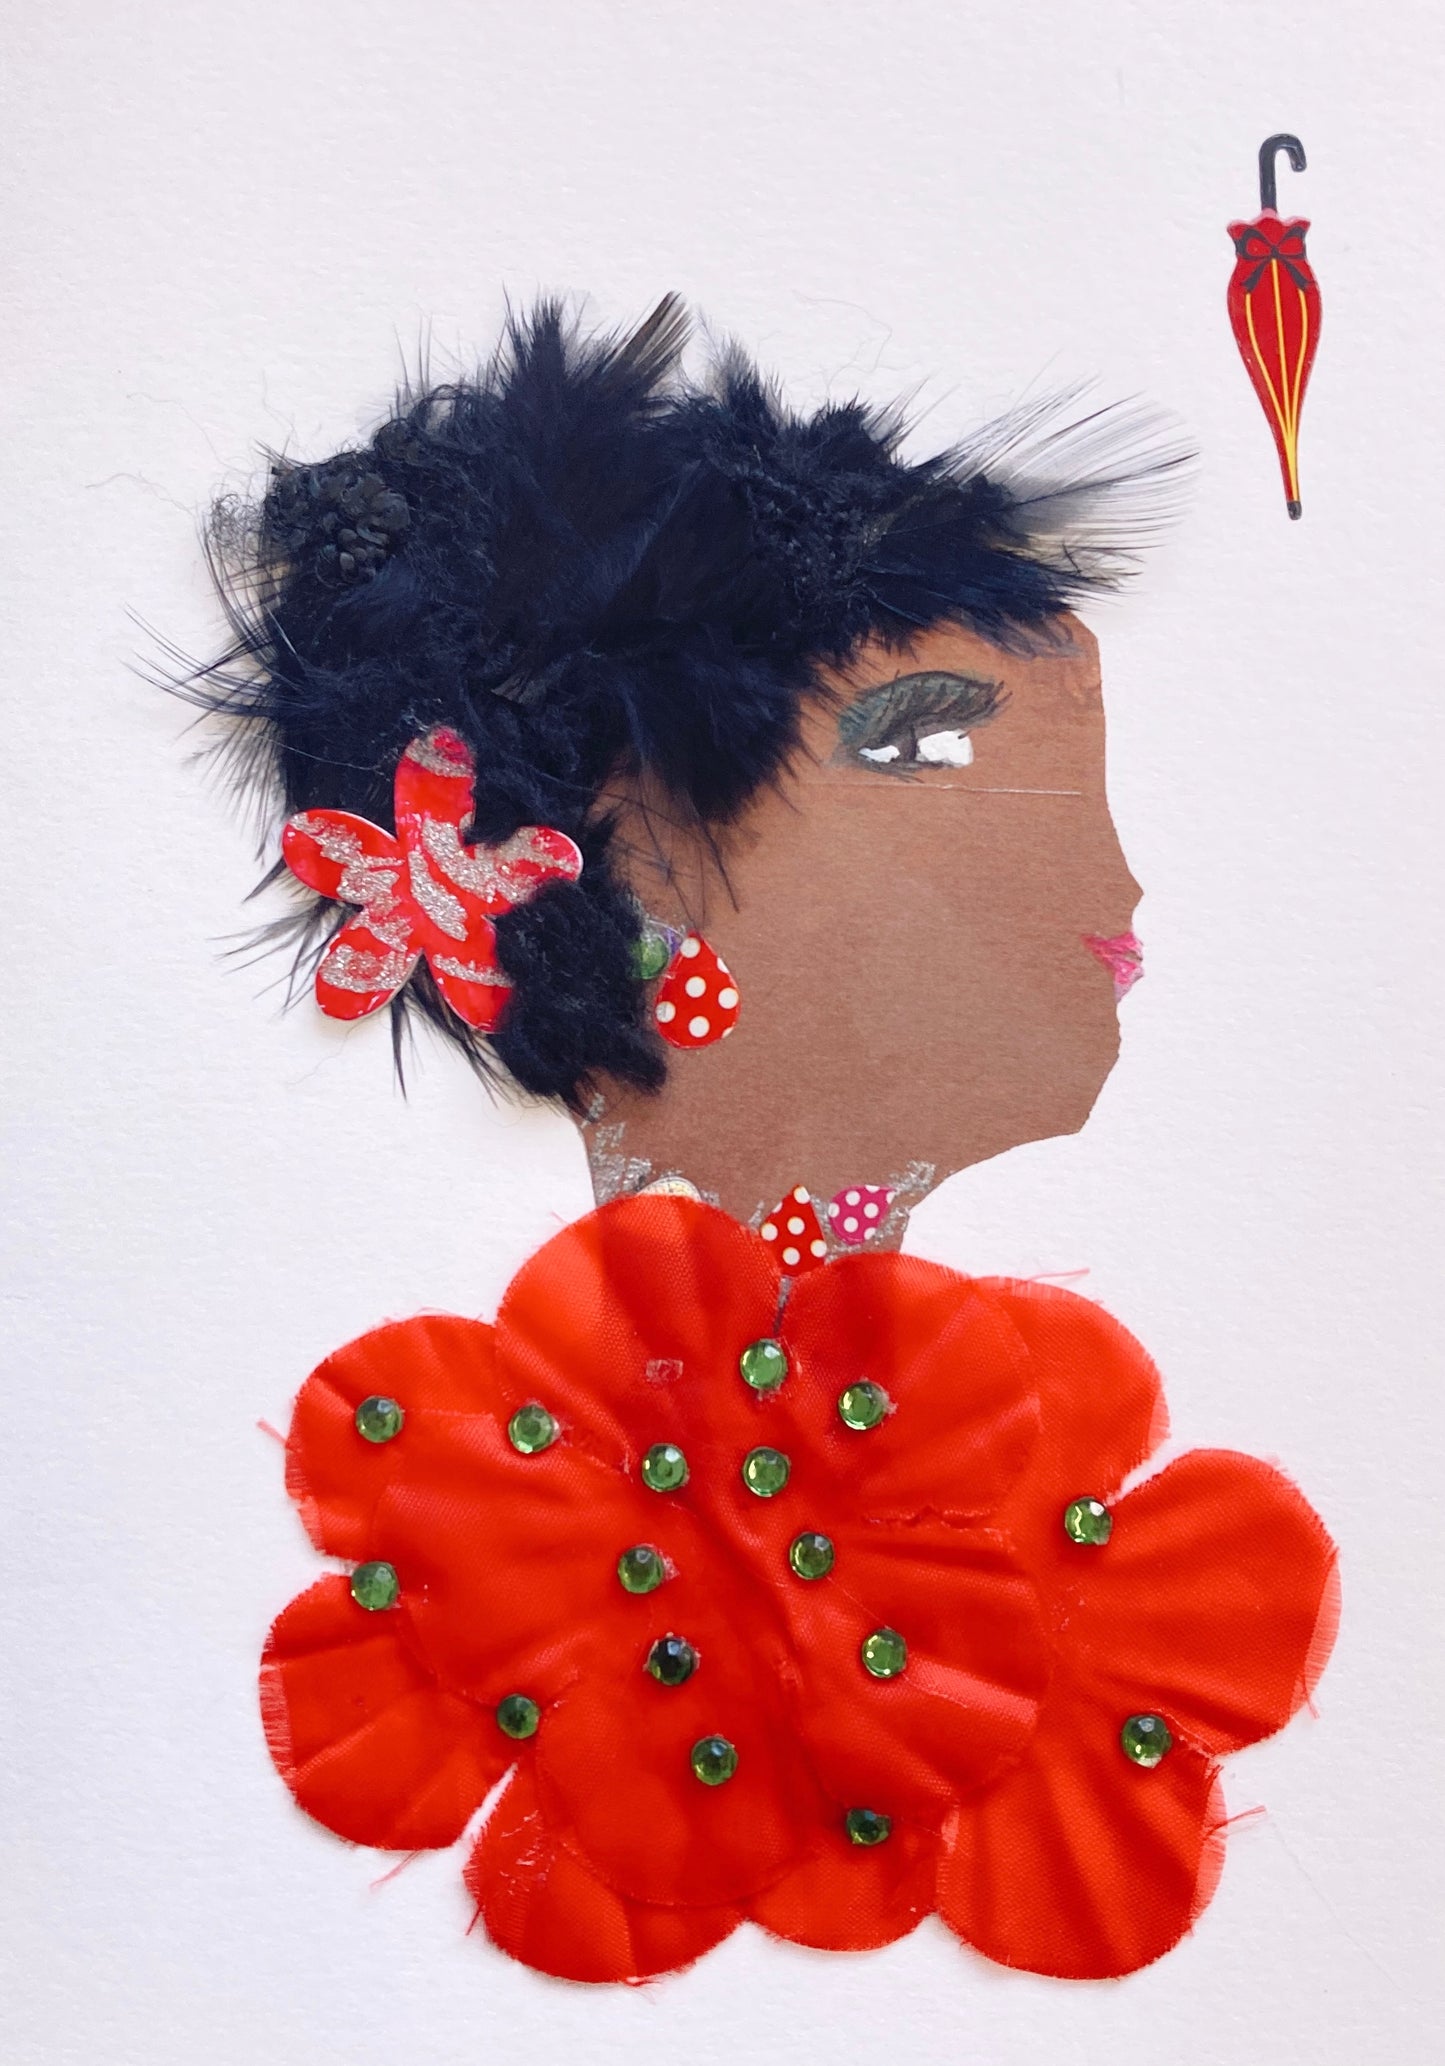 This card has been given the name red lily. She wears a red blouse made of flowers with green gems scattered, and a small red flower in her feathery black hair. In the top right corner, there is a small sticker of a red umbrella. 